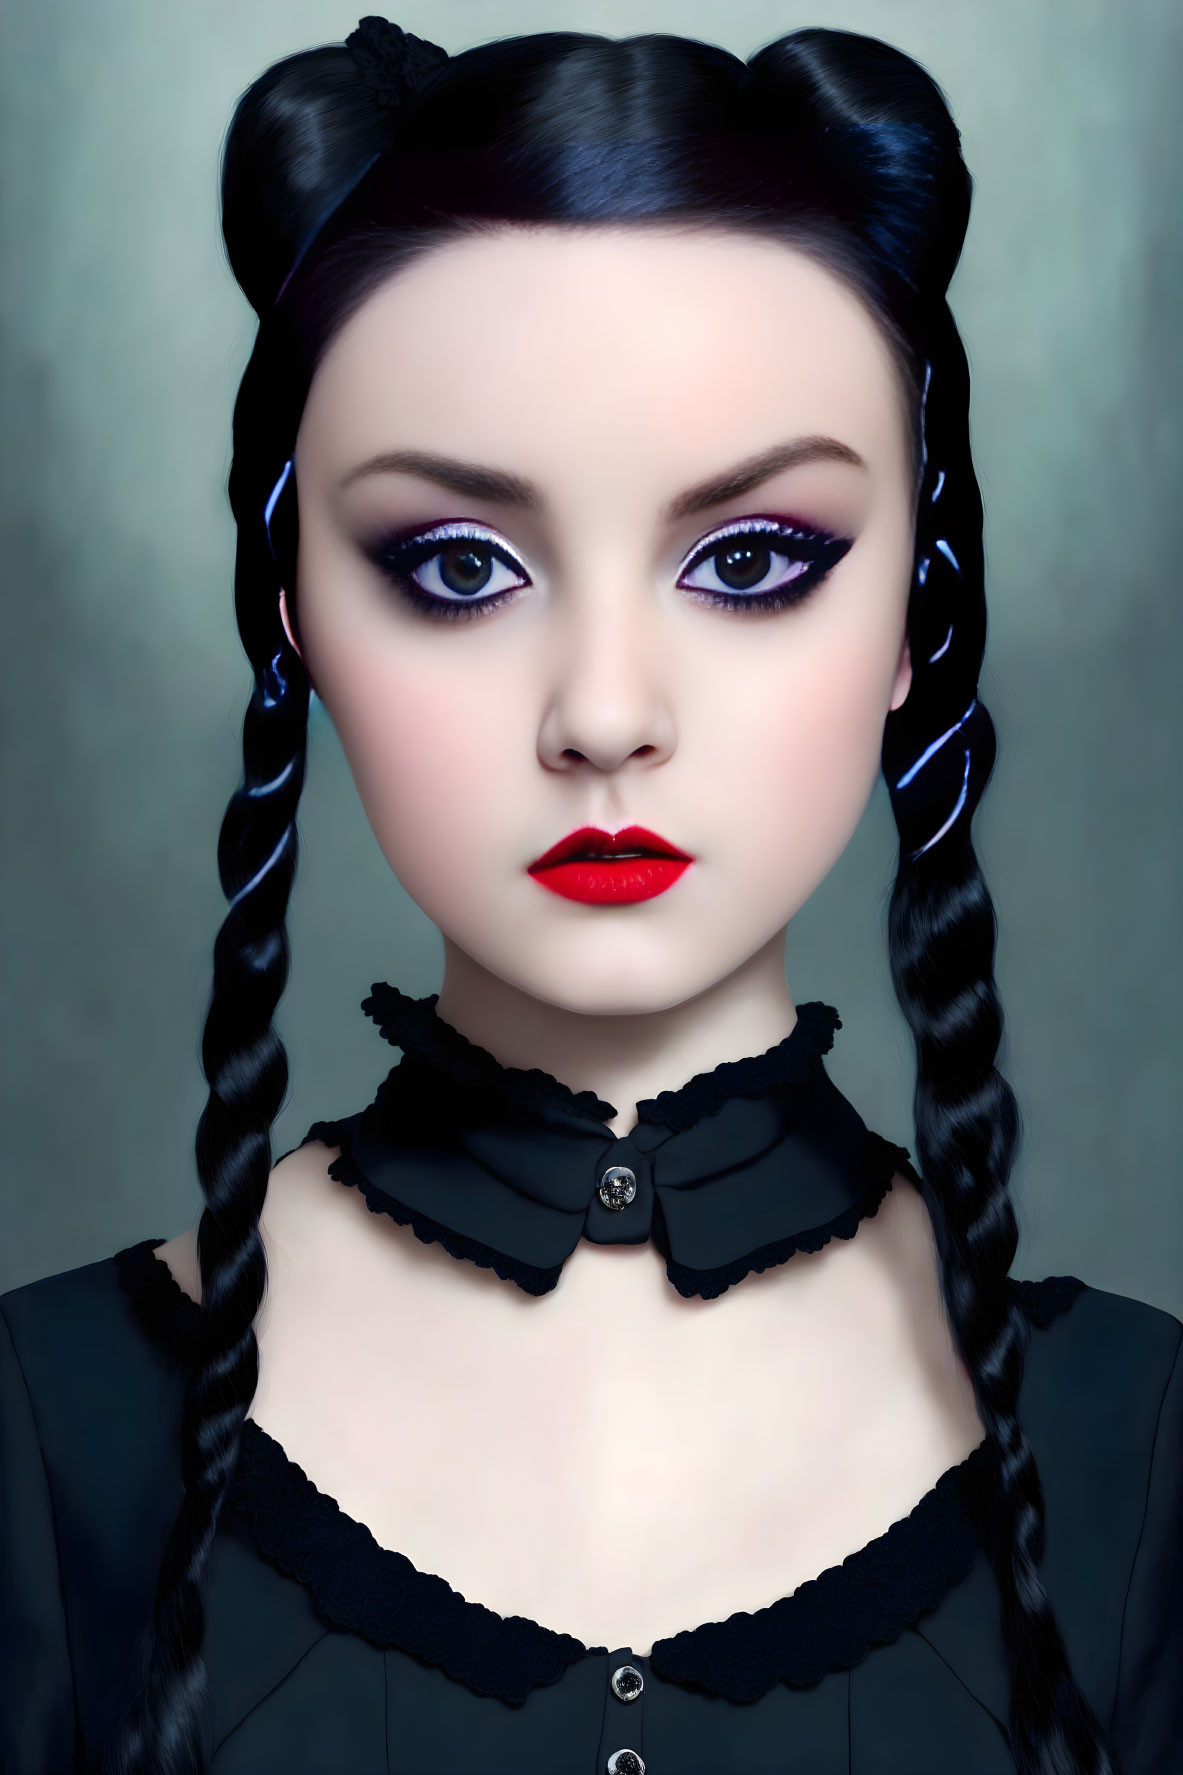 Digital Illustration: Woman with Pale Skin, Dark Hair, Purple Eye Makeup, and Red Lips